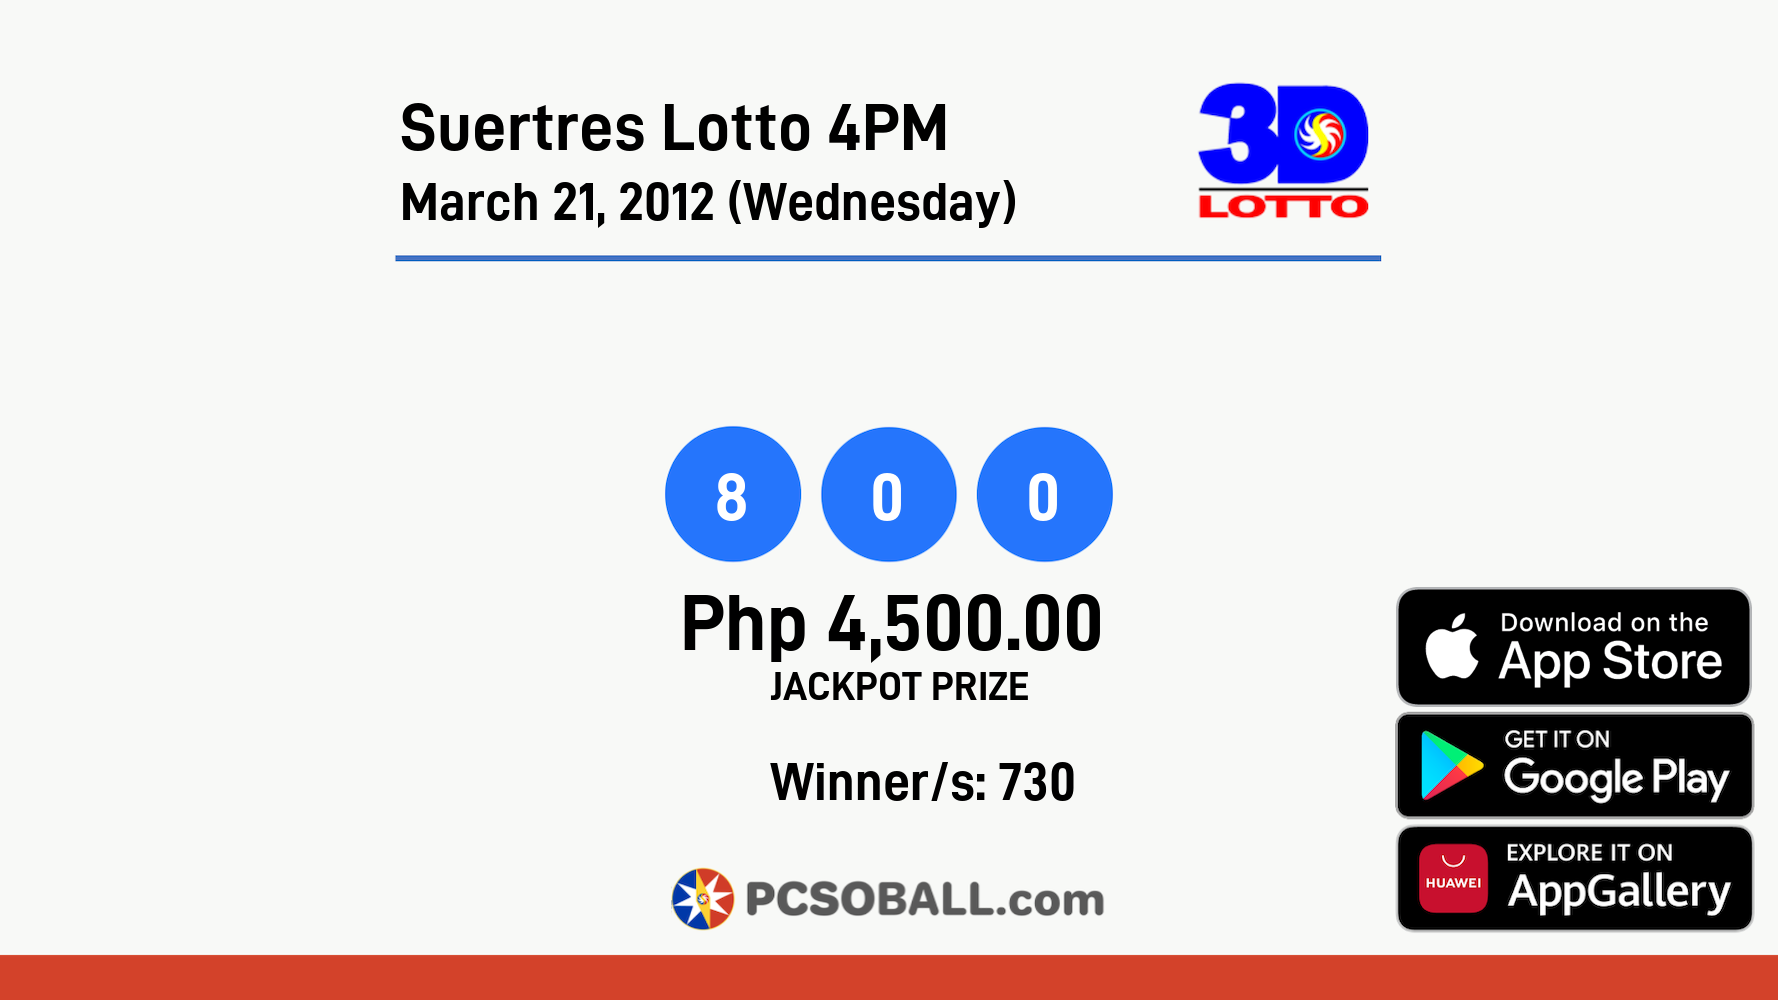 Suertres Lotto 4PM March 21, 2012 (Wednesday) Result